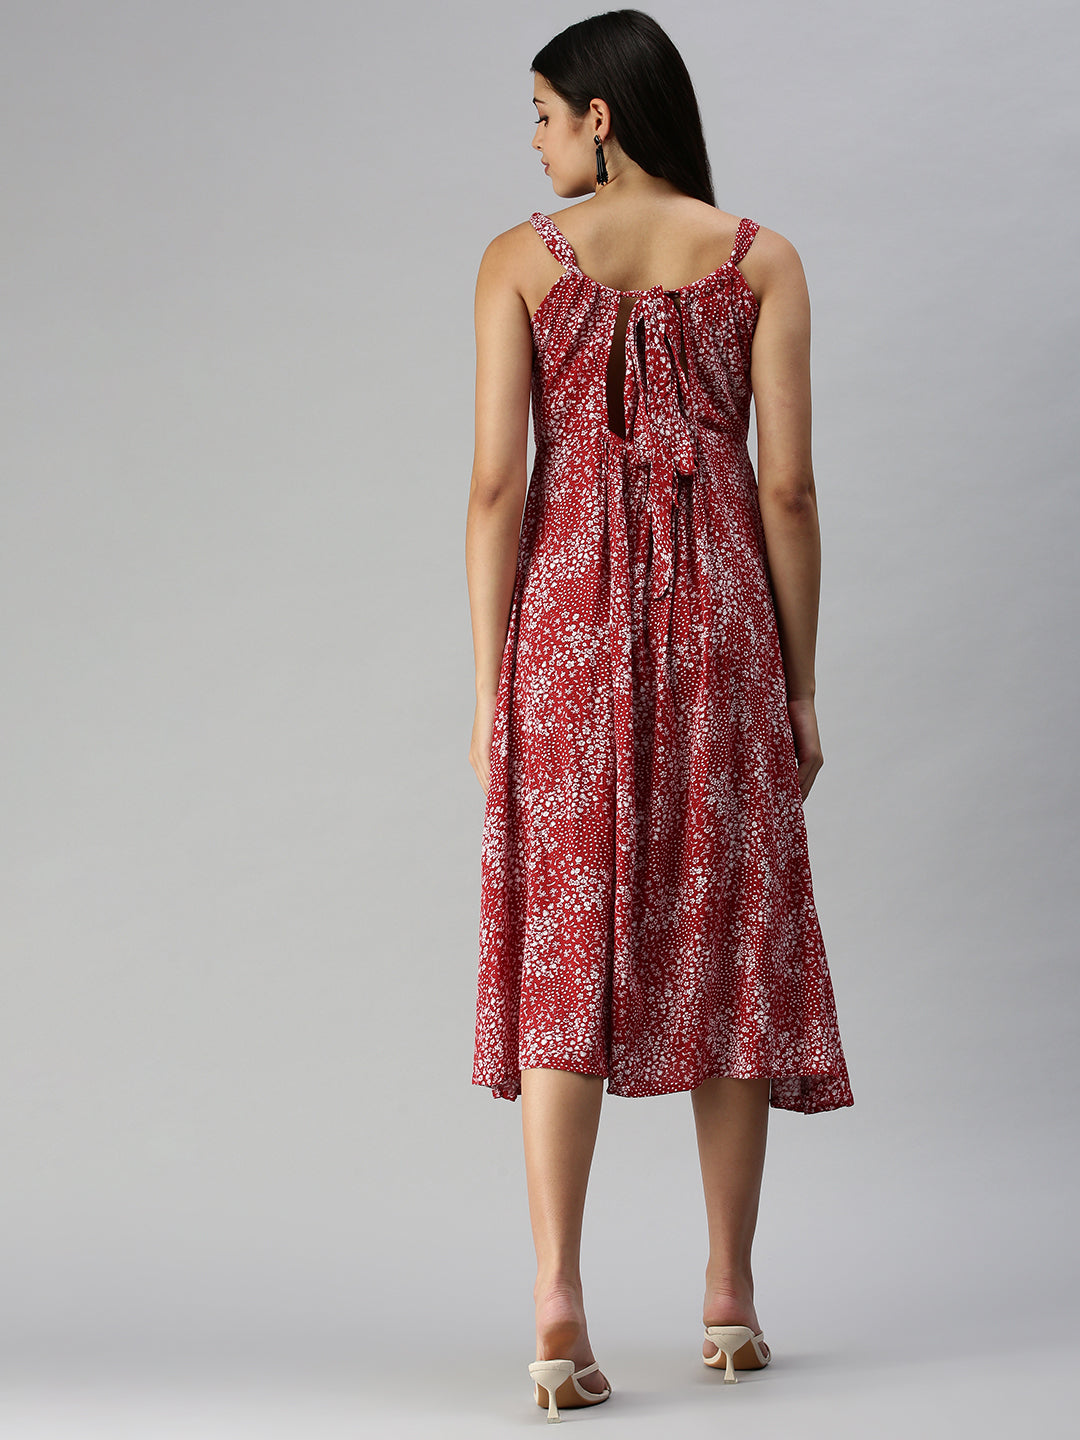 Women's Red Floral A-Line Dress